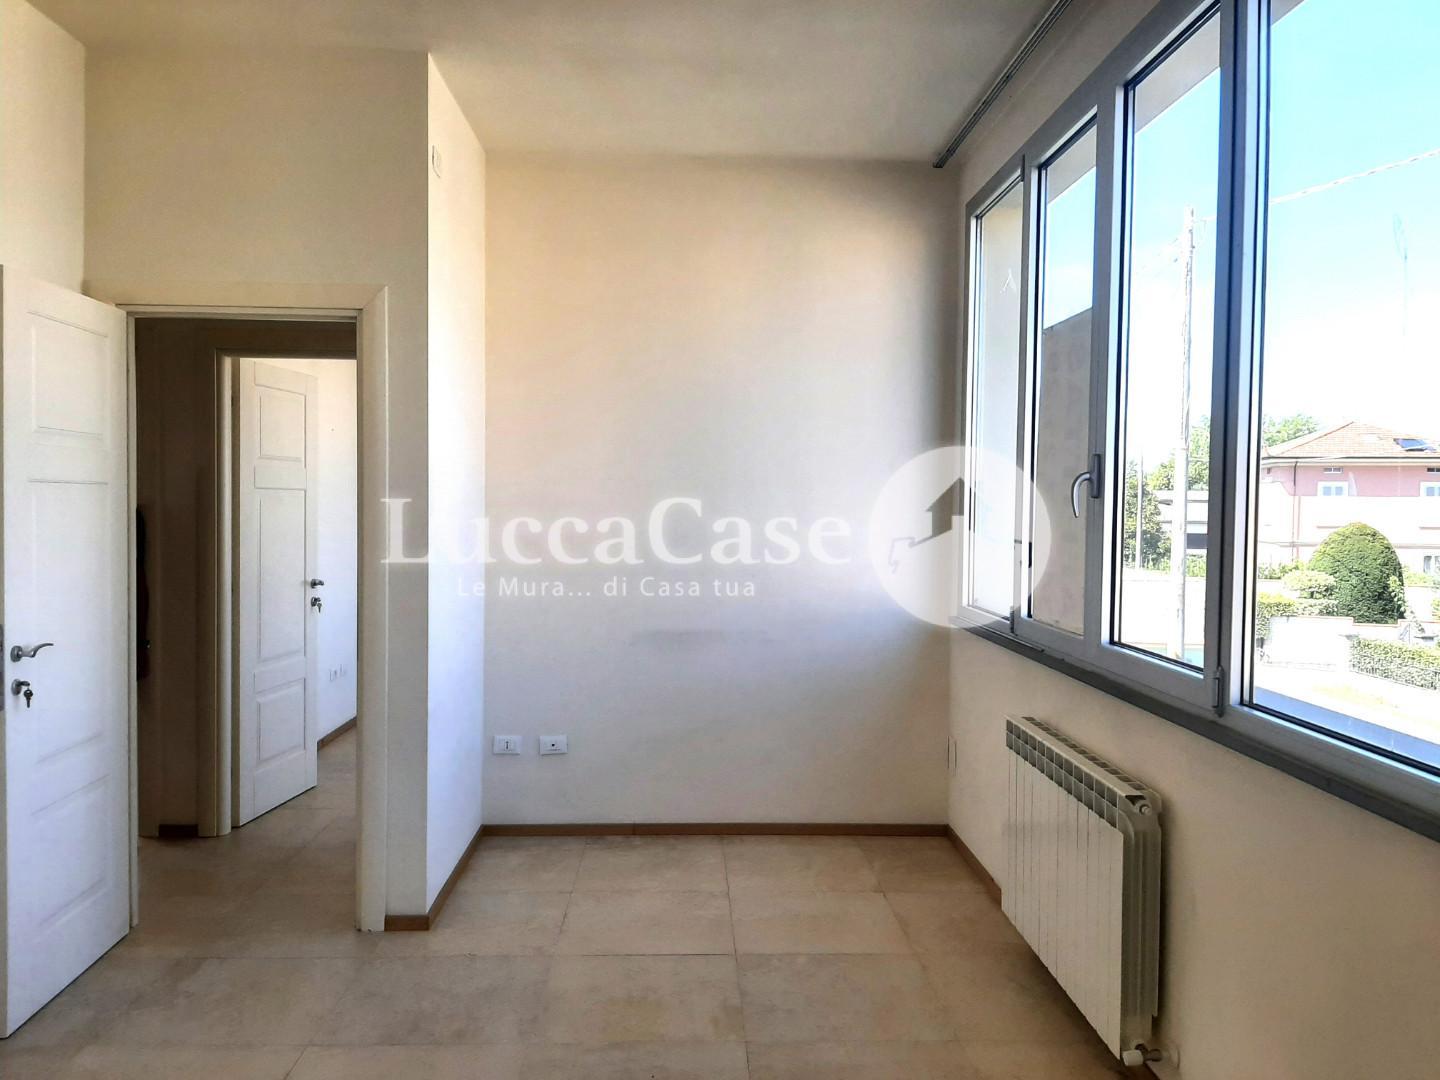 Office for commercial rentals in Lucca